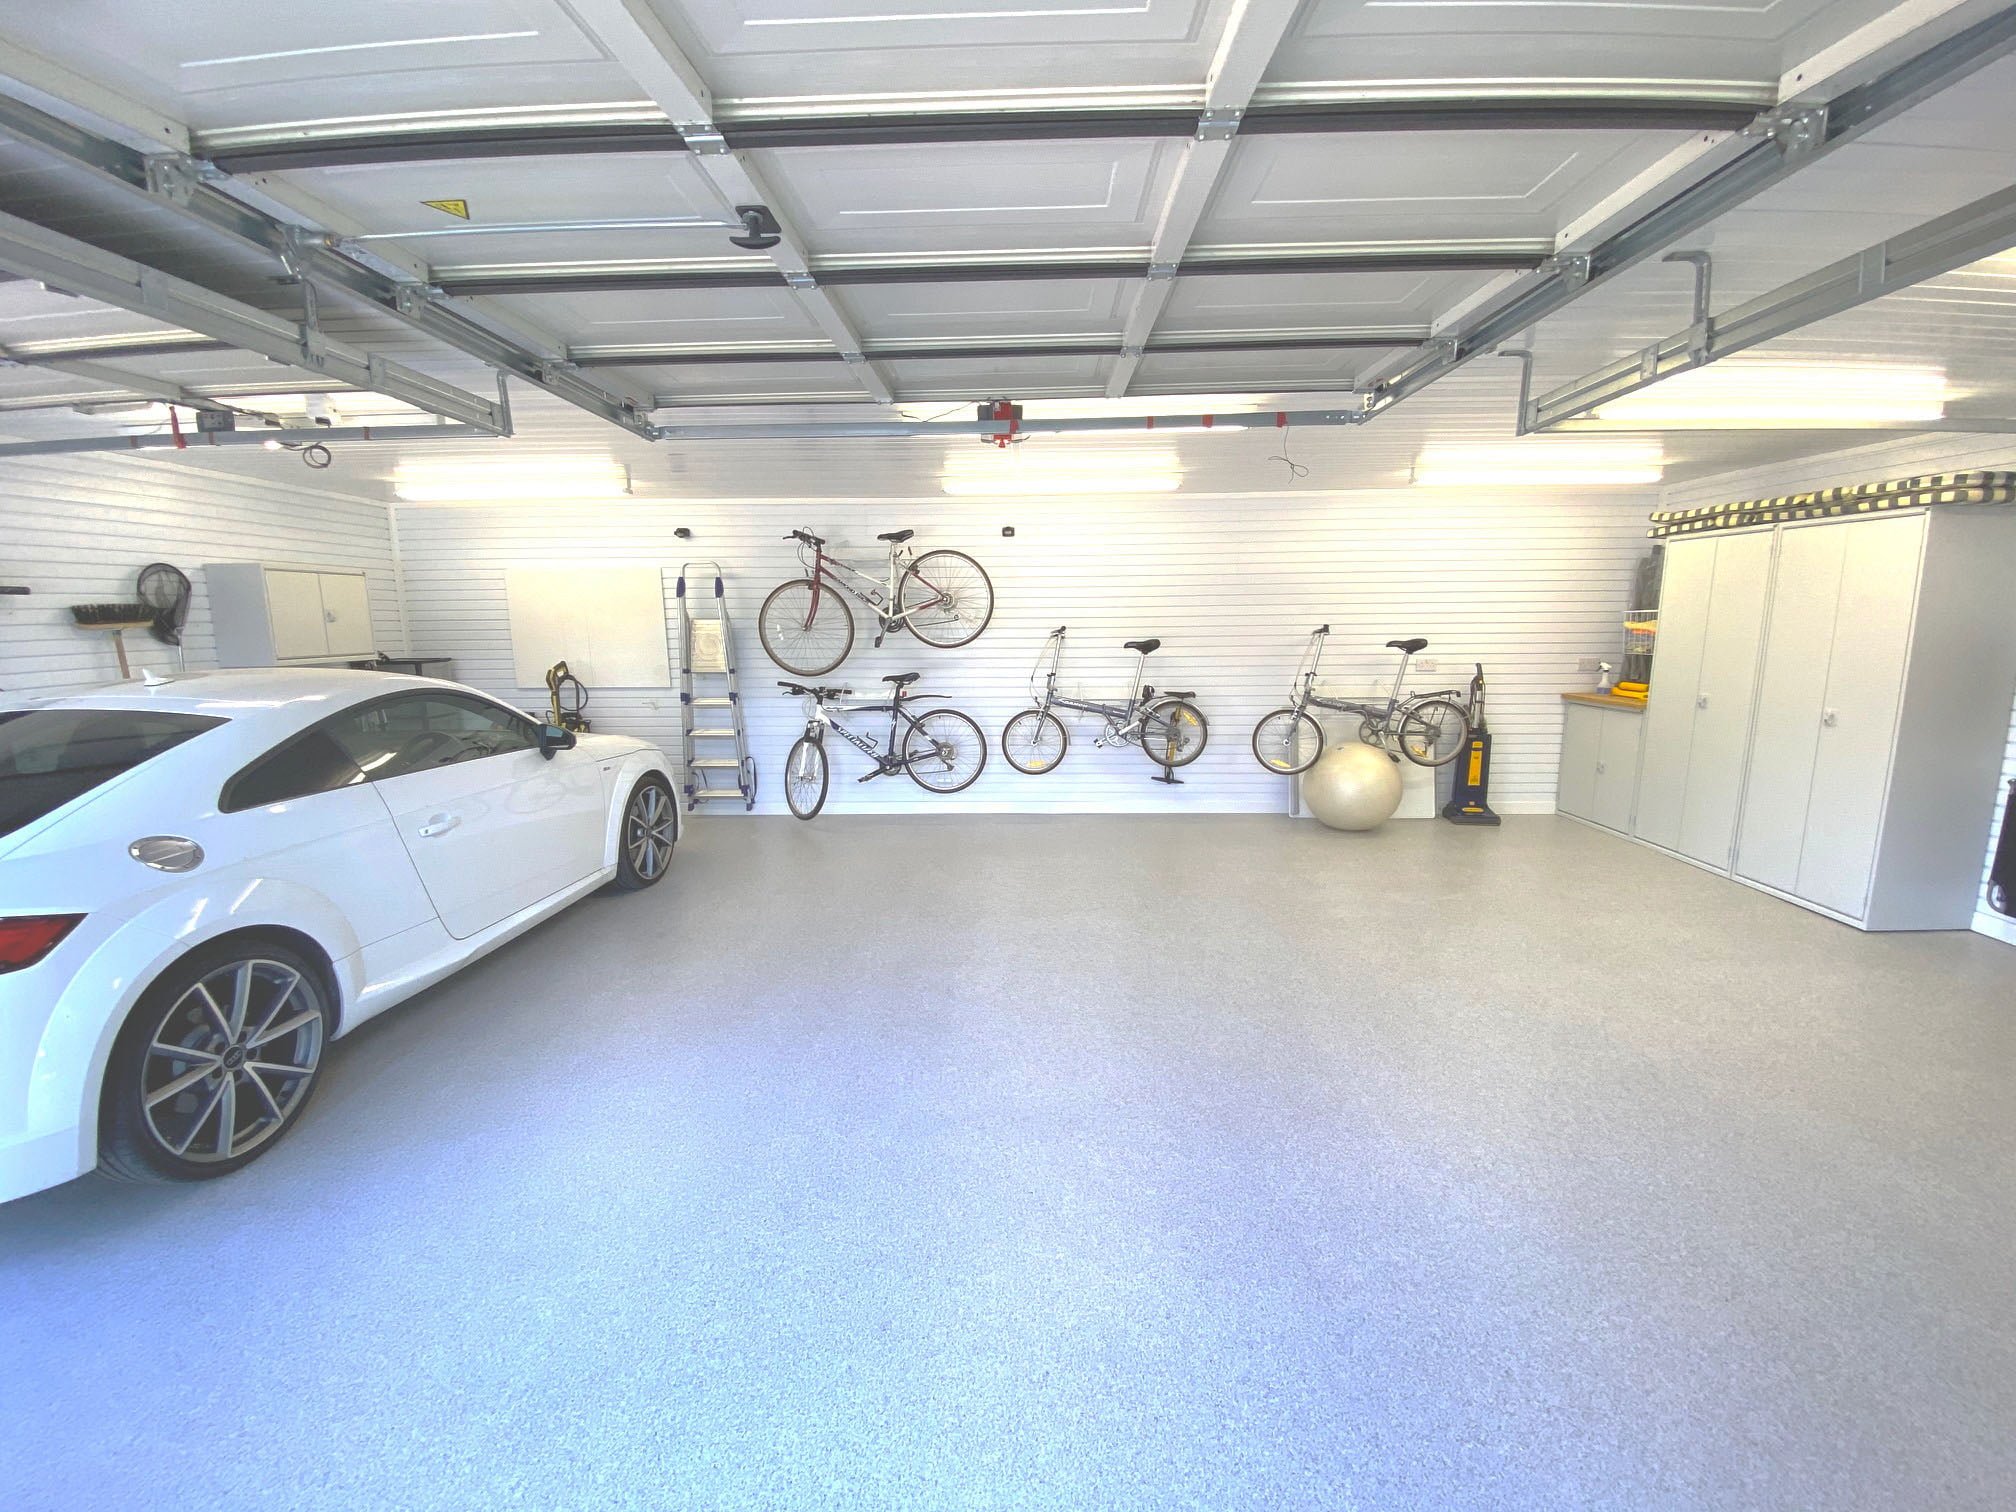 A double garage with a blue resin floor, white cladded walls, bike racks and a white car on the left of the image.